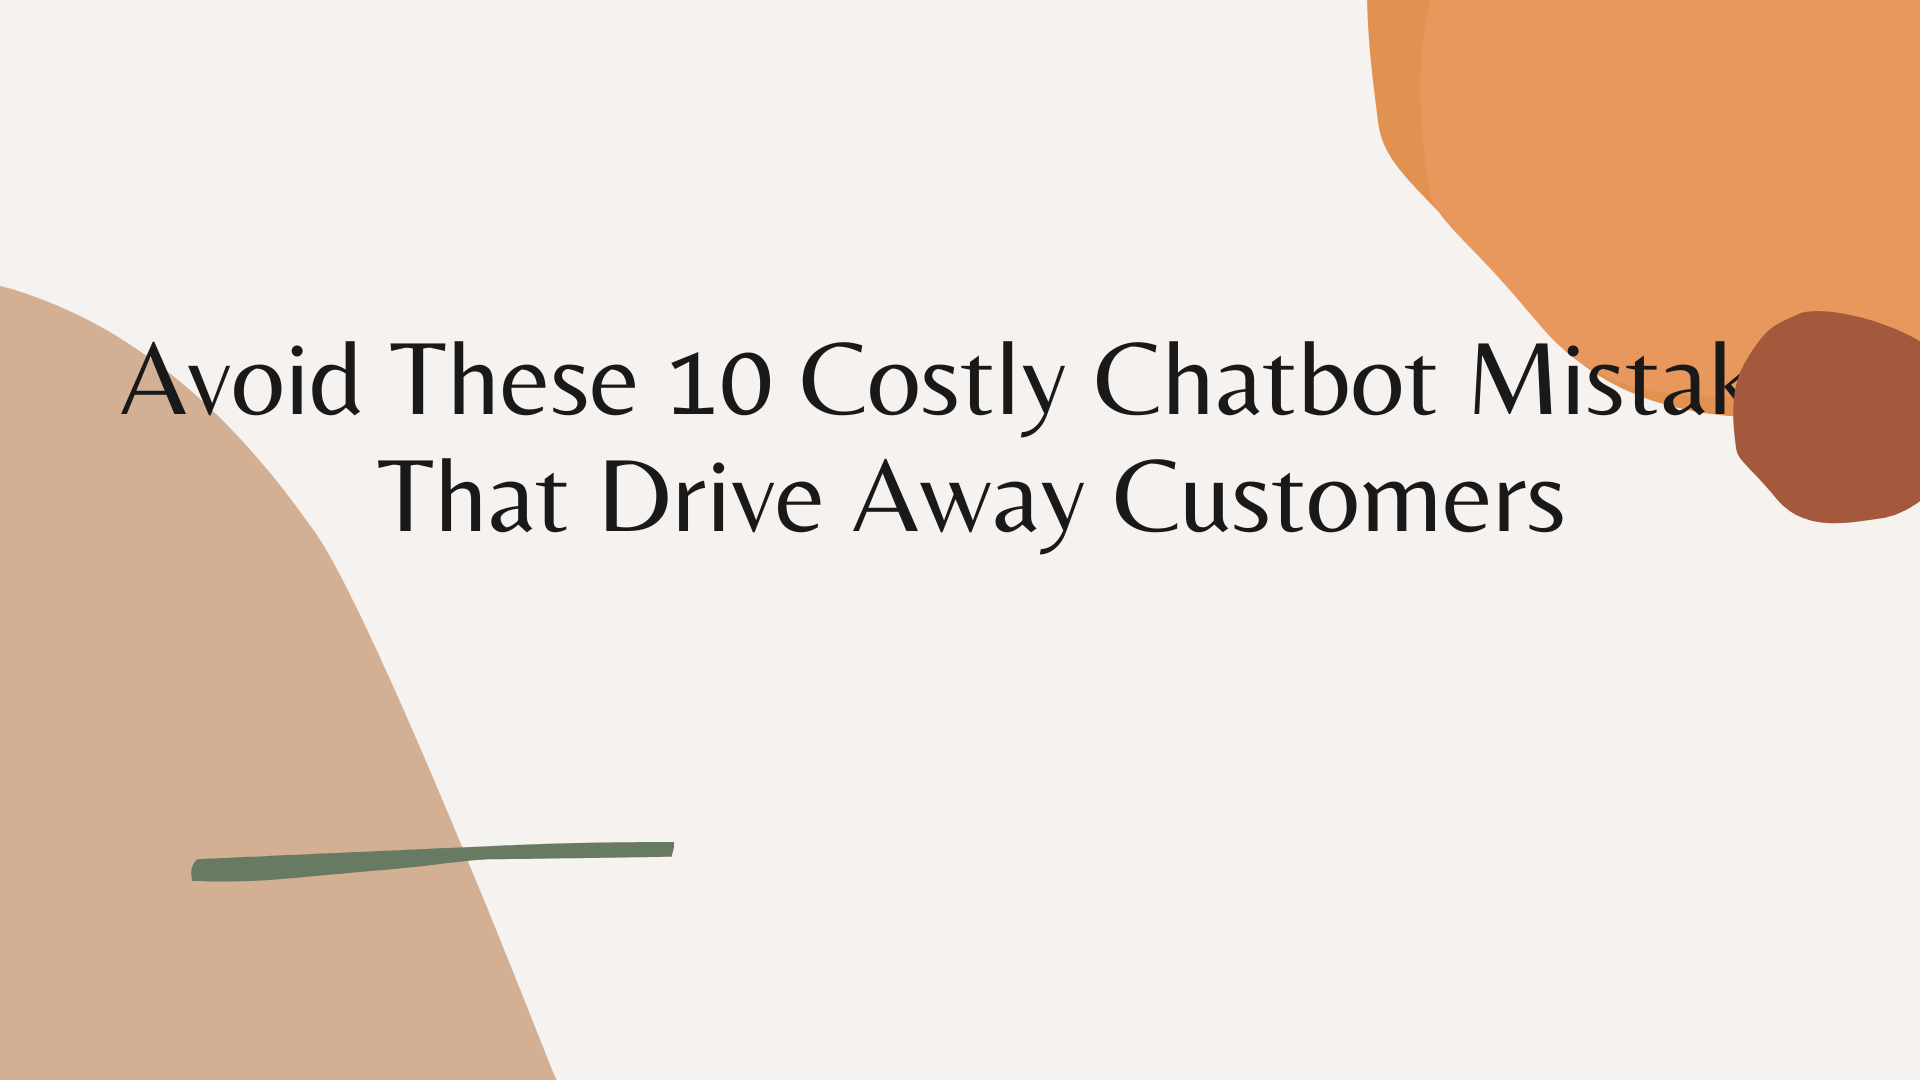 Avoid These 10 Costly Chatbot Mistakes That Drive Away Customers